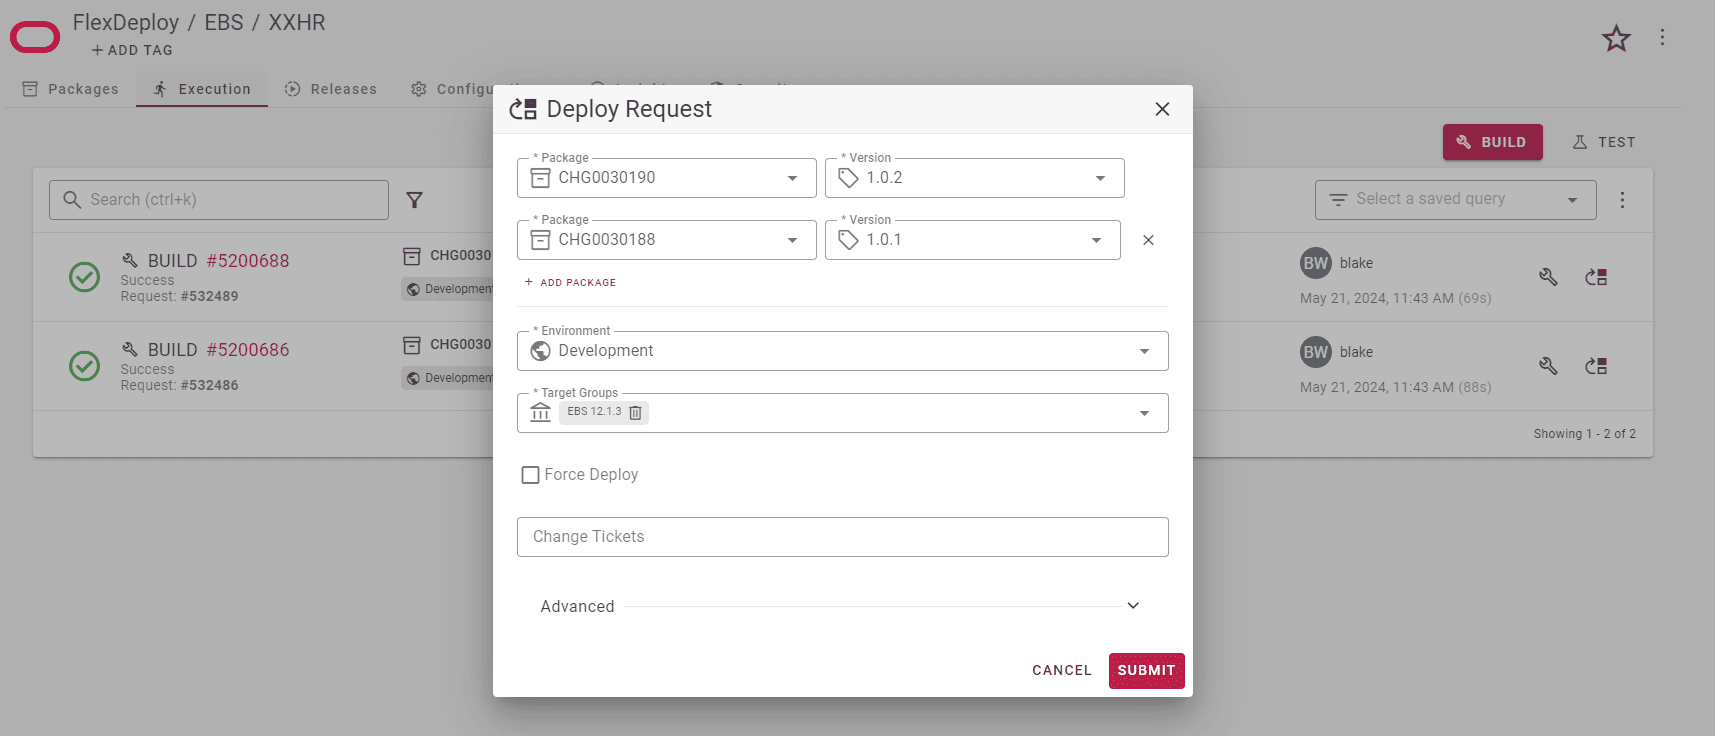 Deploy Request Form in FlexDeploy.